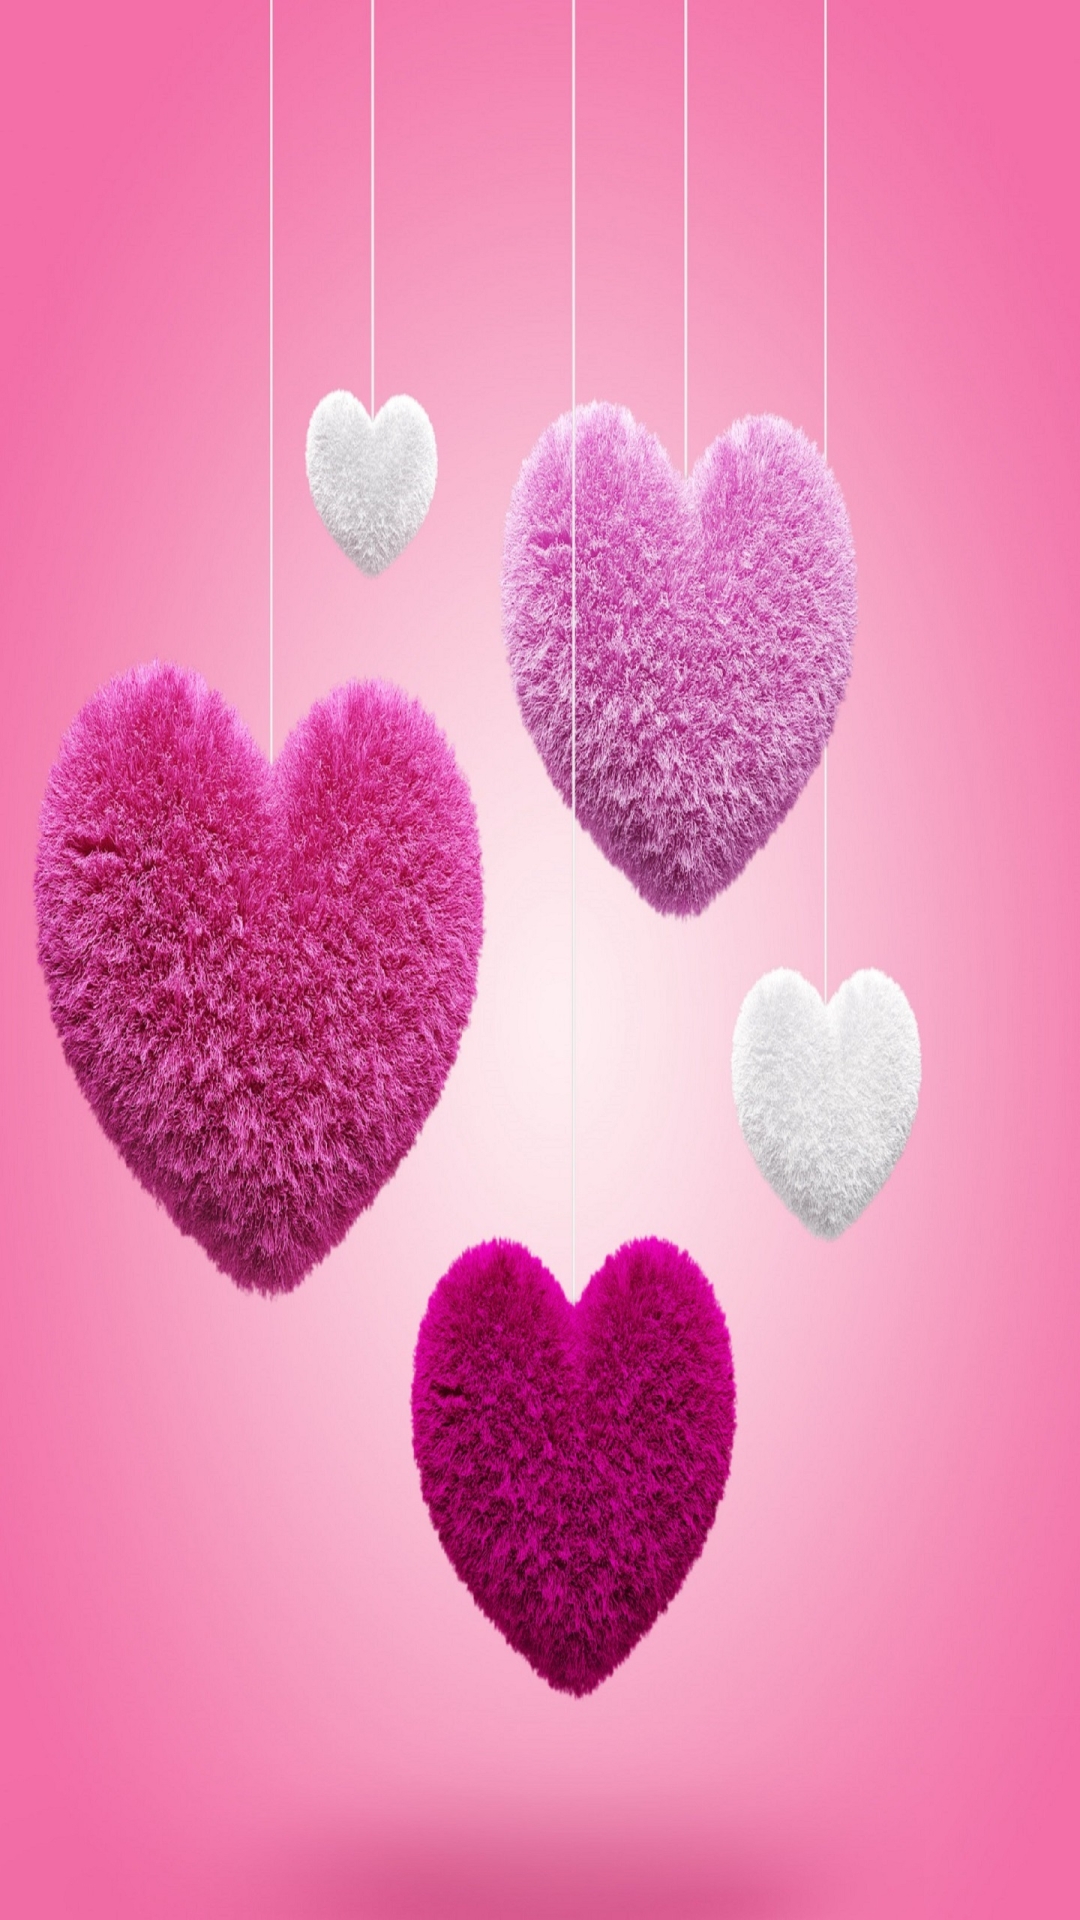 Fluffy Hearts for Samsung A9 Pro & A7 resolution